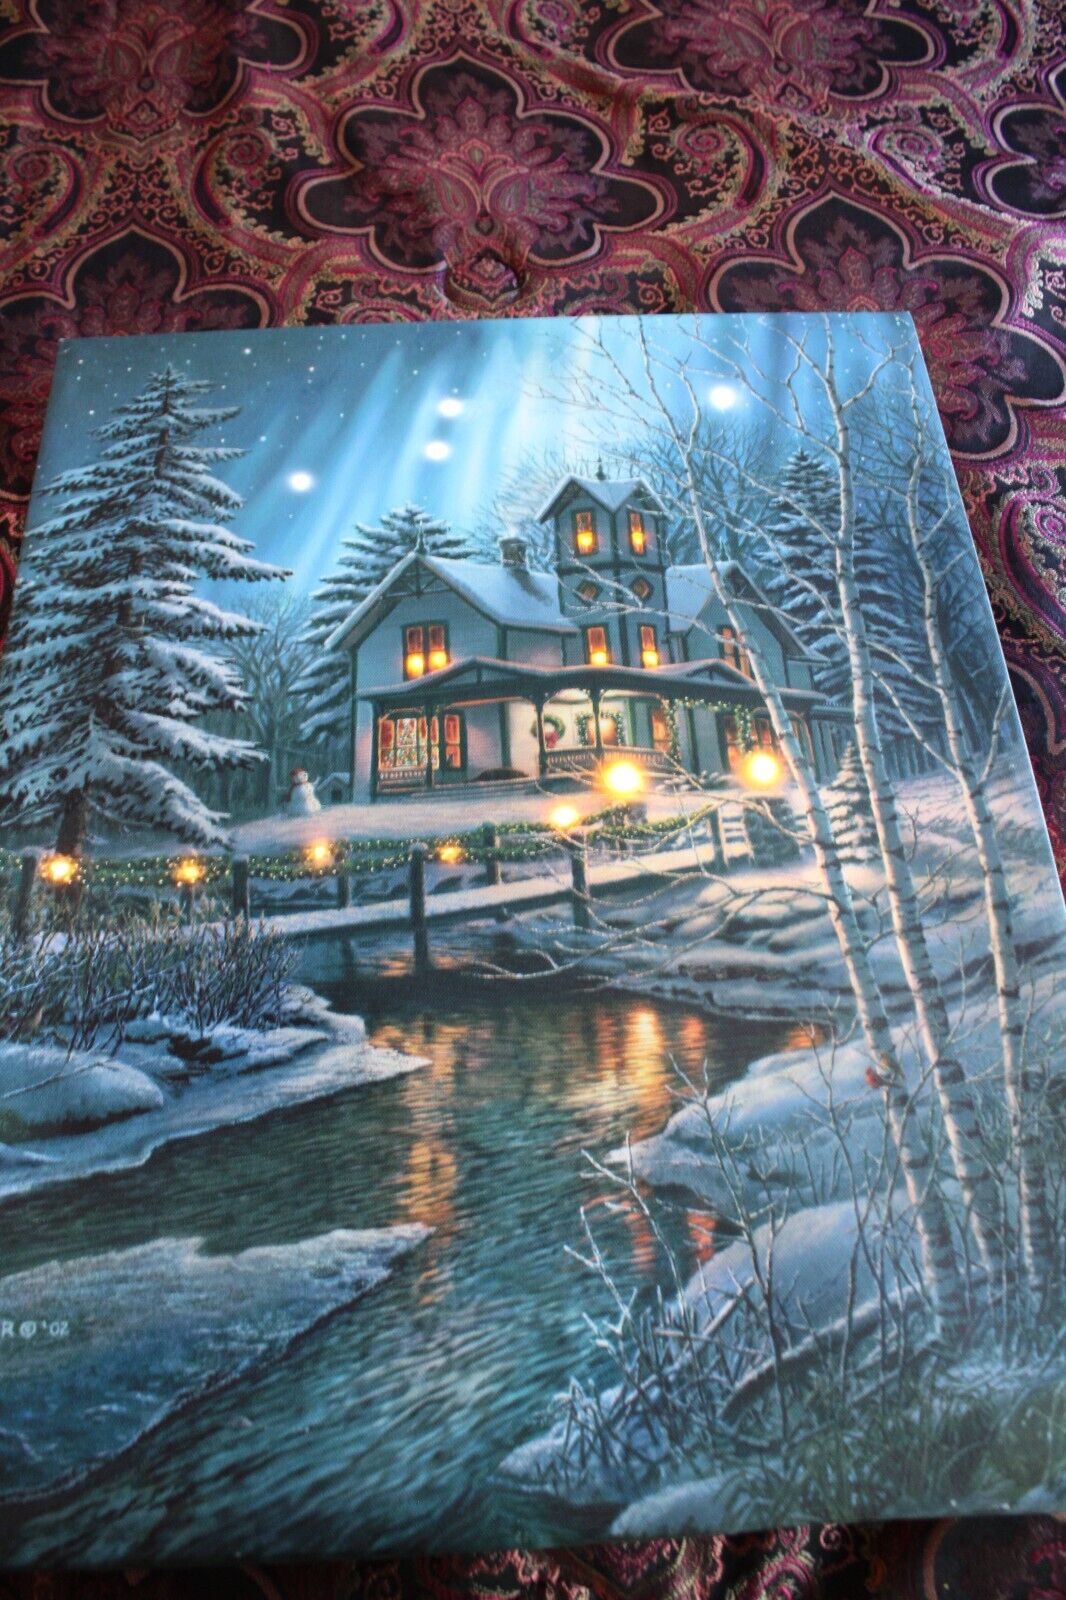 16x20” Canvas Christmas Art Illuminated - Wall Hanging Art - Home by the Lake